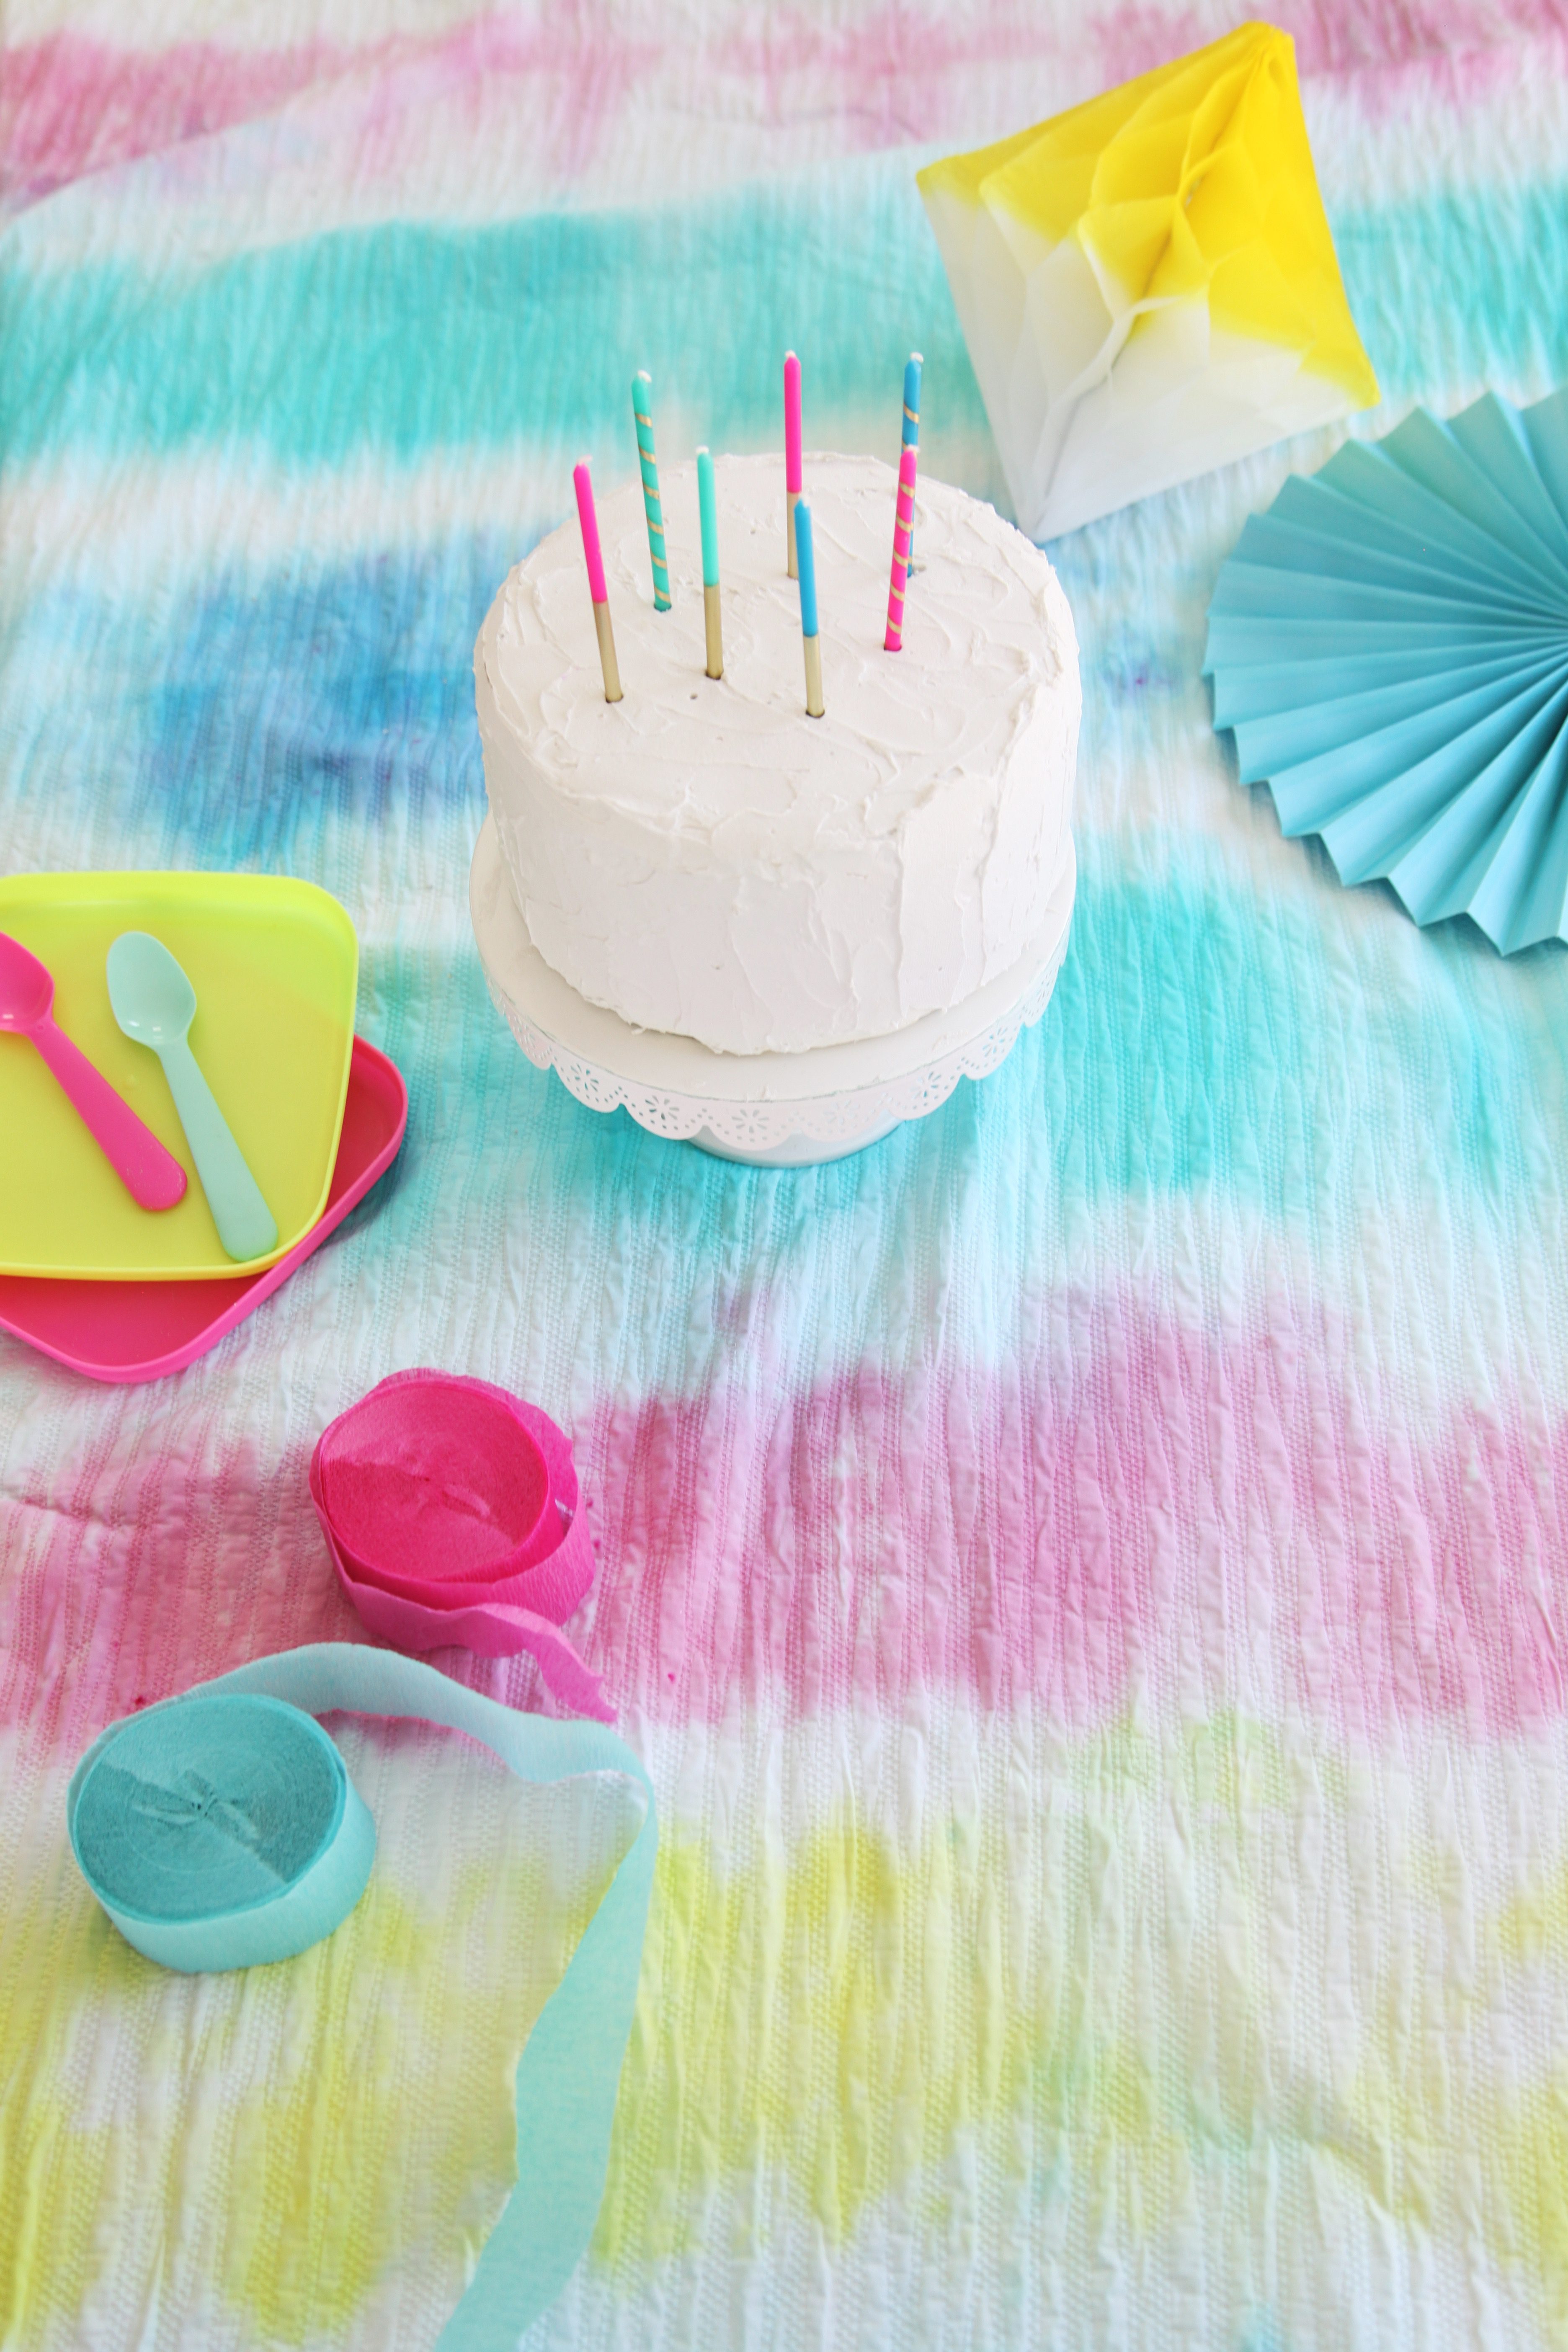 Summer Stripes: How to Make a DIY Tie Dye Tablecloth + a tutorial featured by Top US Craft Blog + The Pretty Life Girls